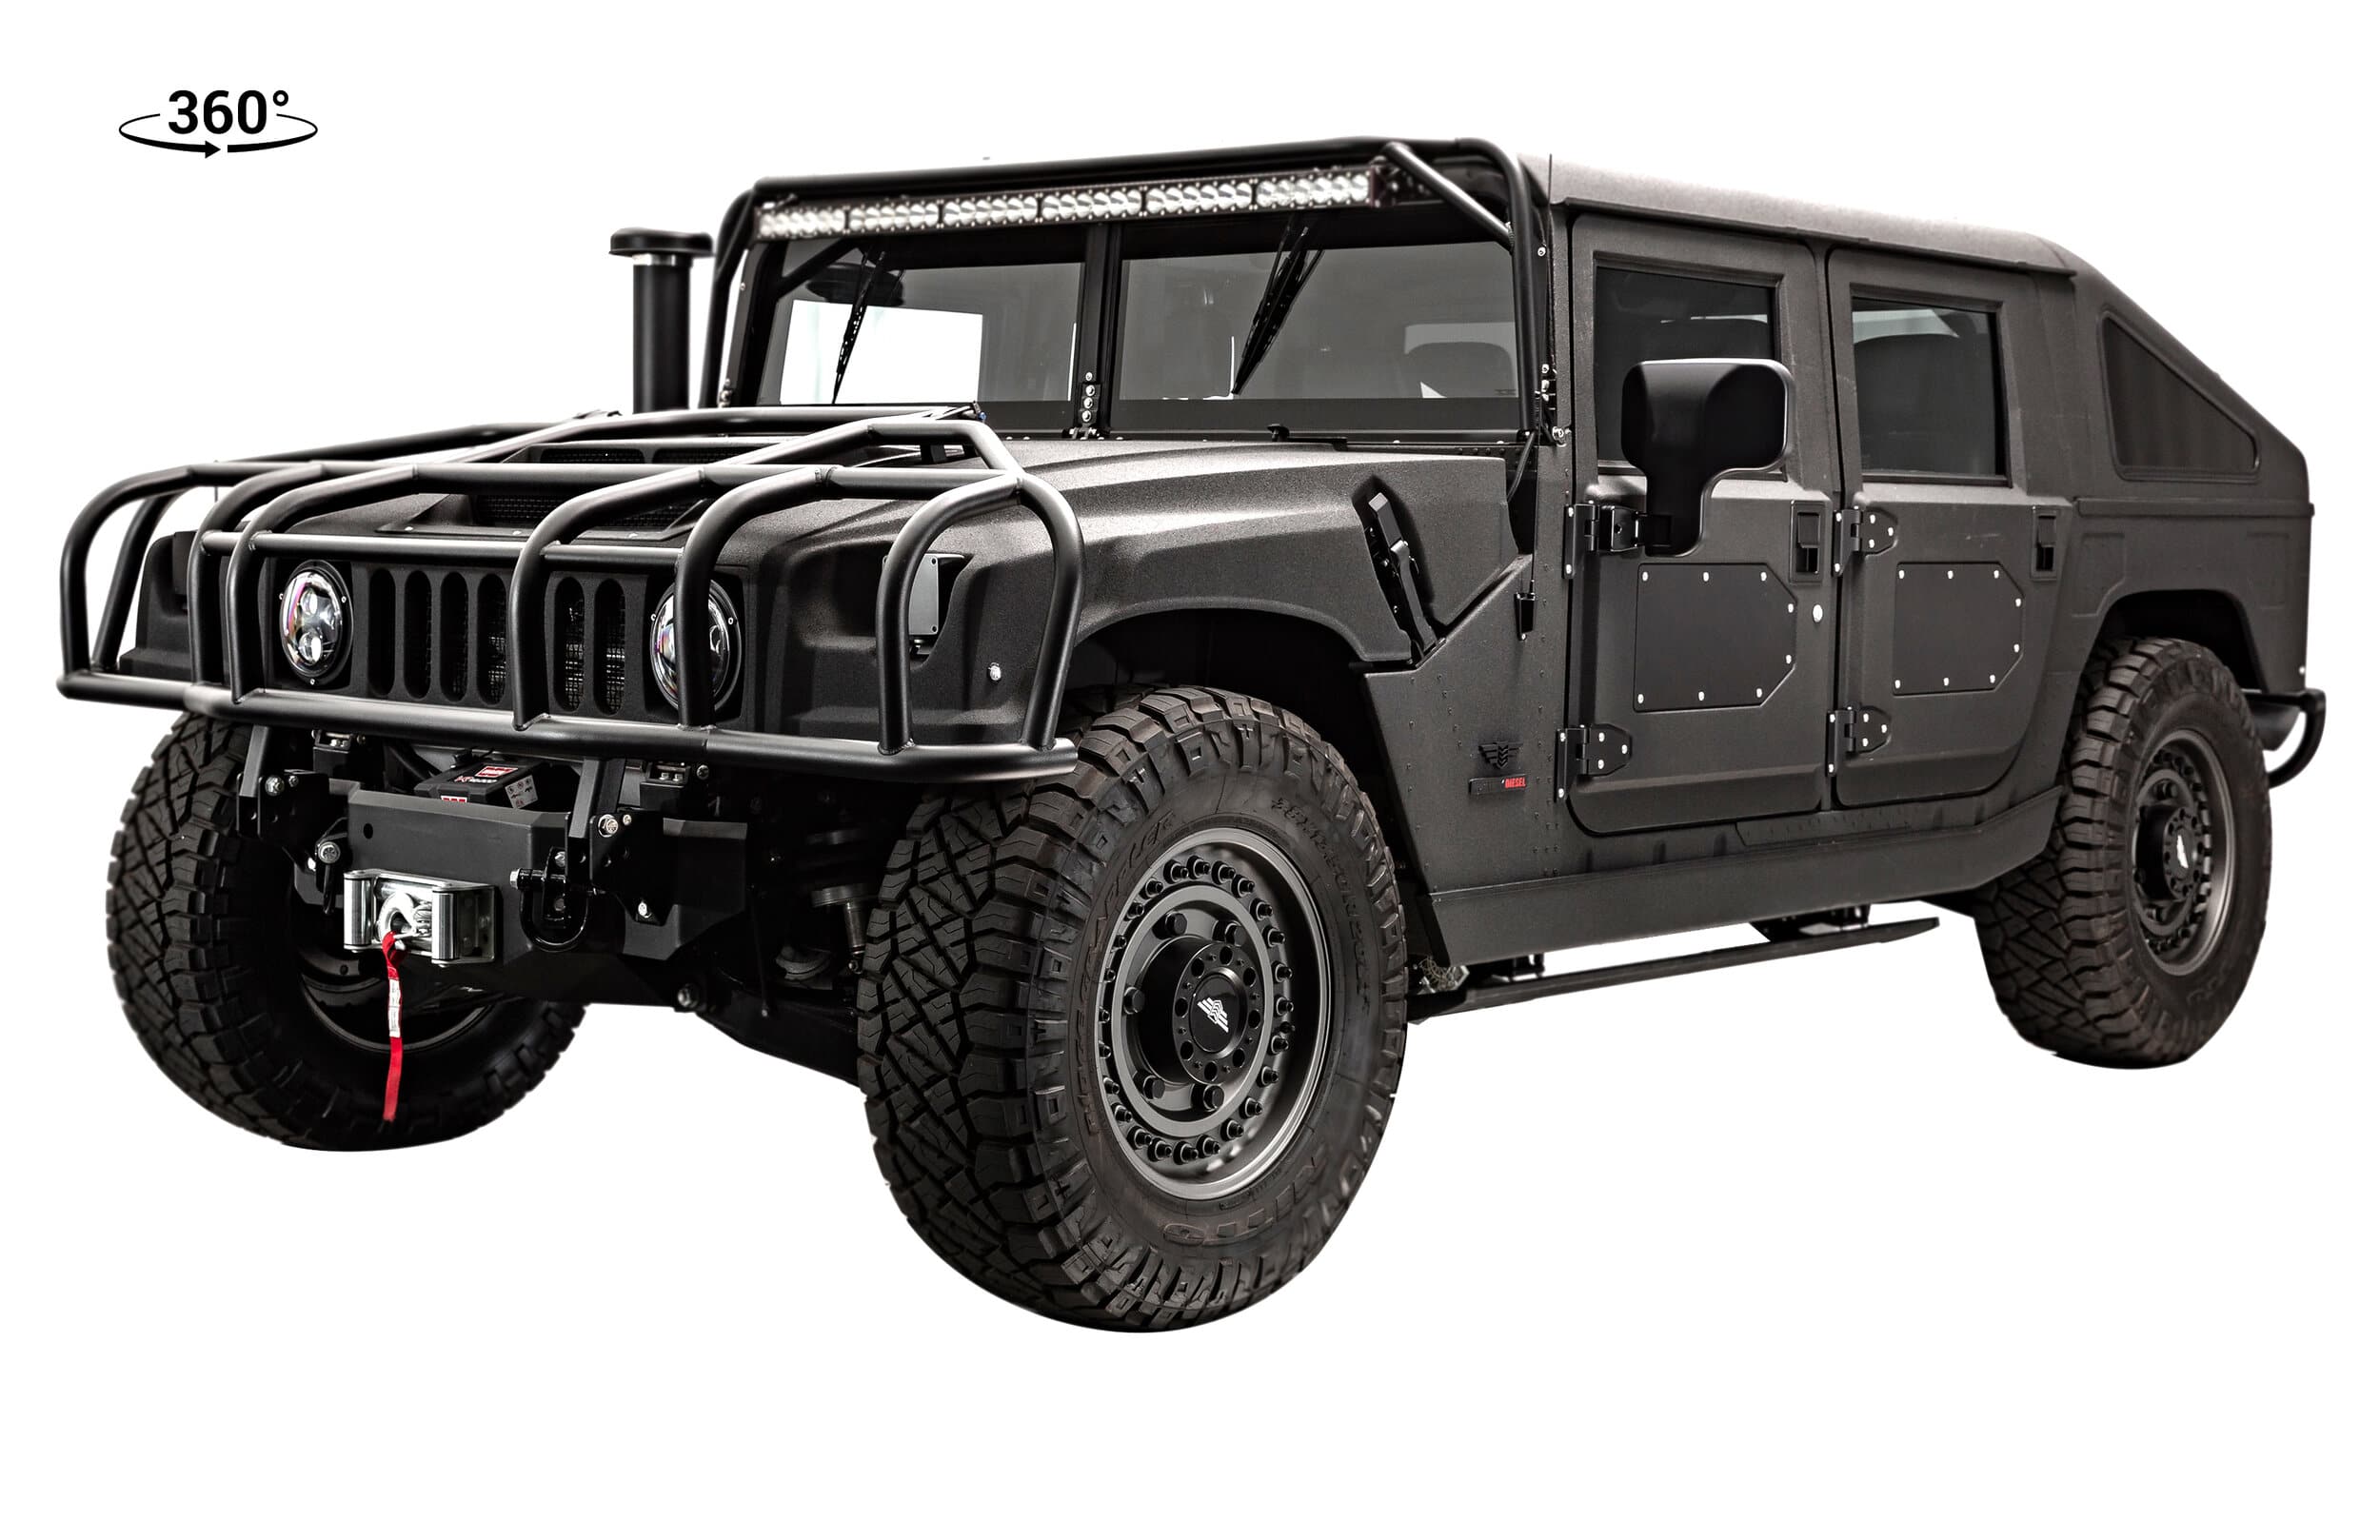 The Mil-Spec Hummer H1 Is Built For Off-Roading